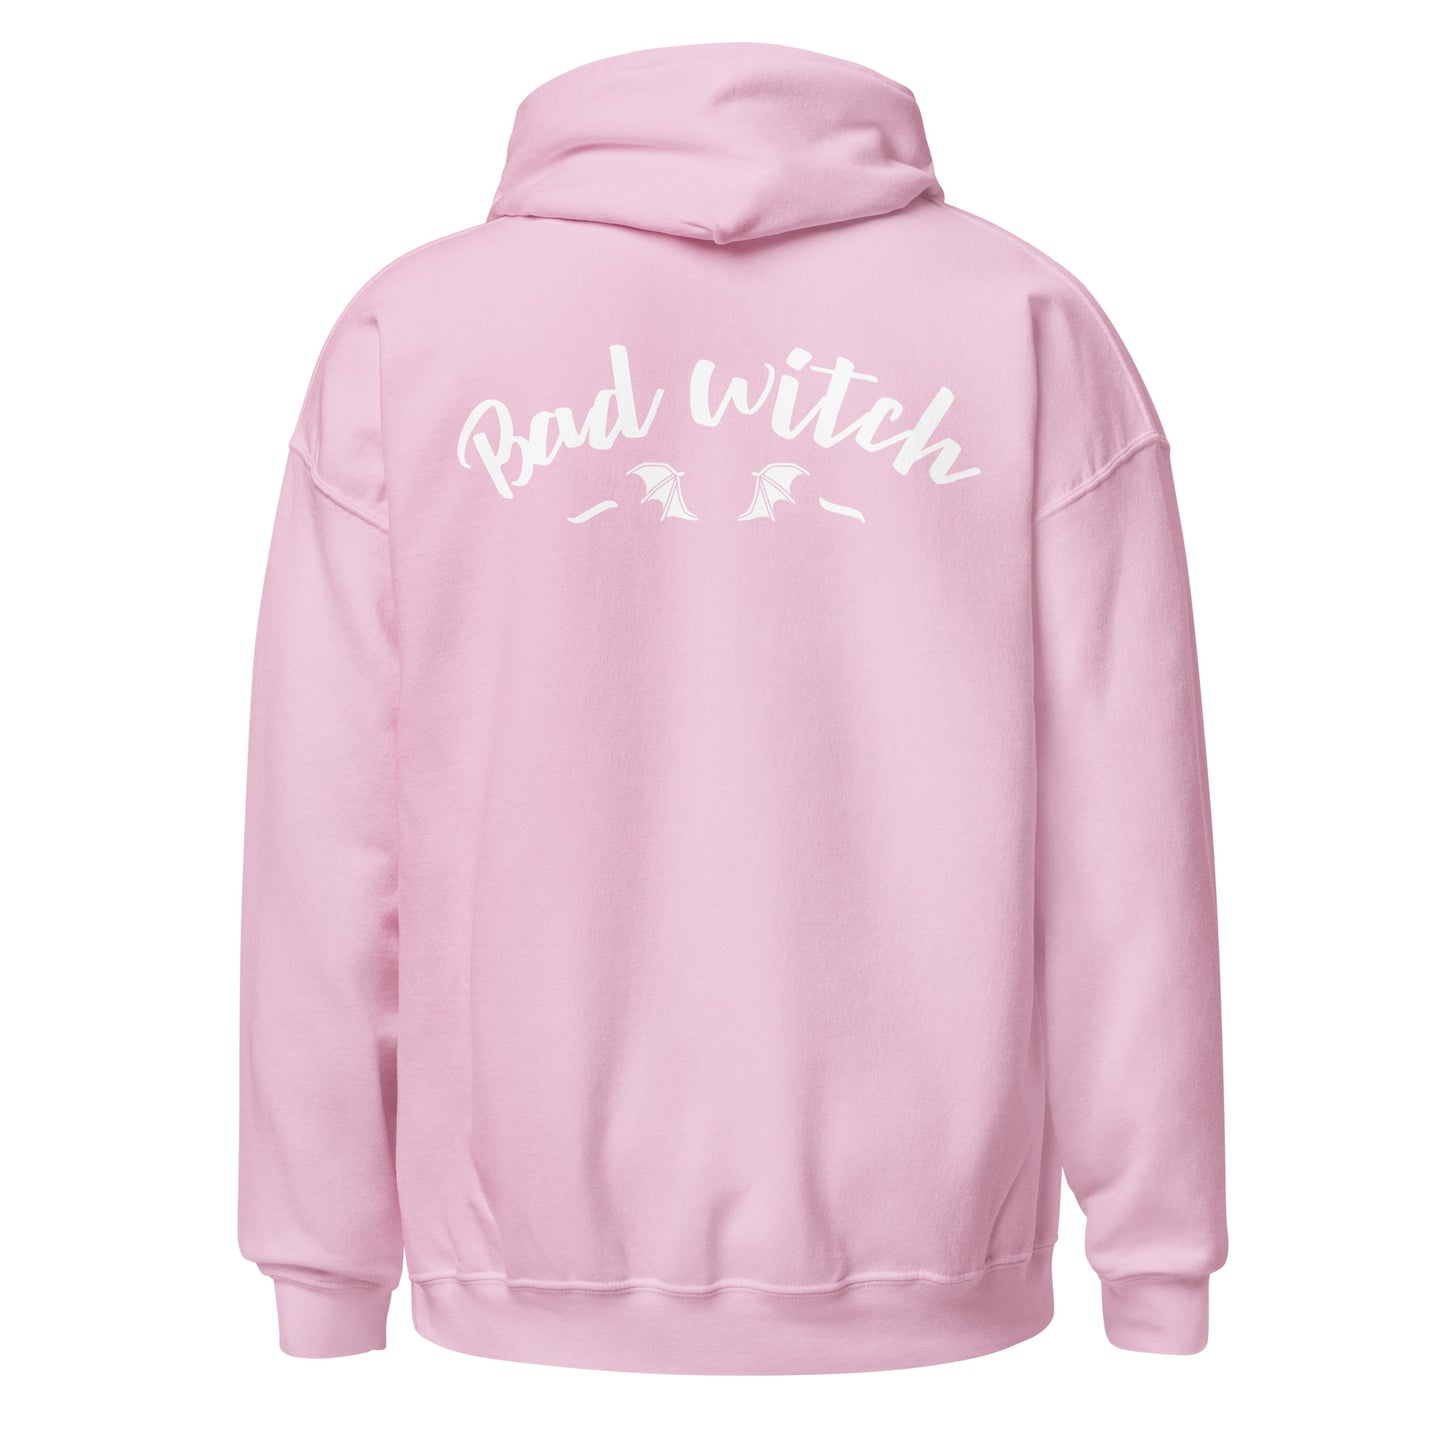 Beauty Coven Co. Bad Witch Hoodie